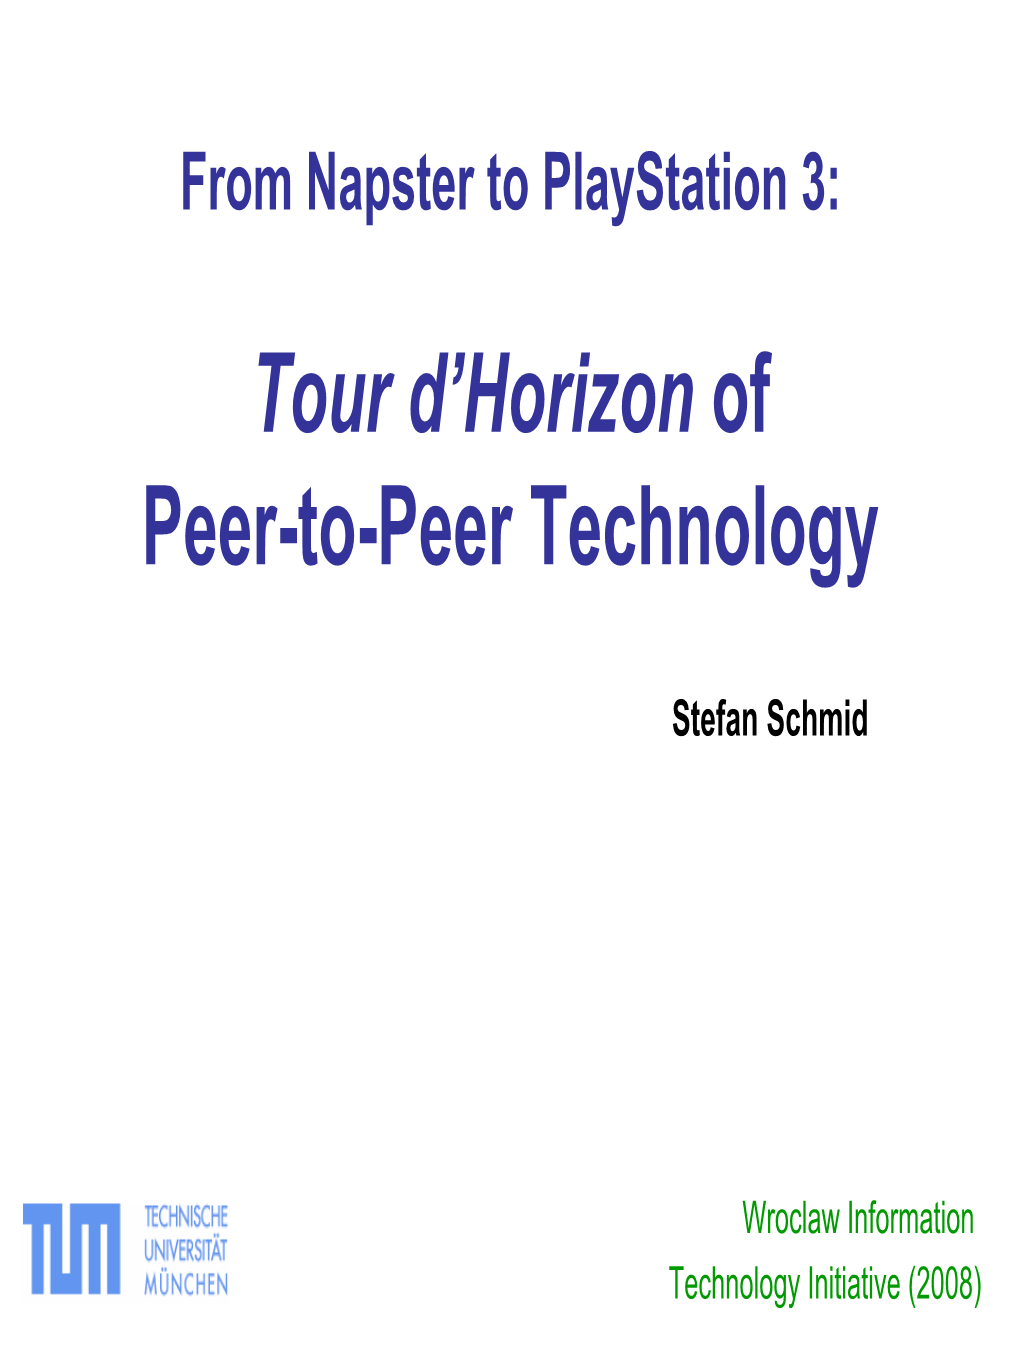 From Napster to Playstation 3: Tour D'horizon of Peer-To-Peer Technology